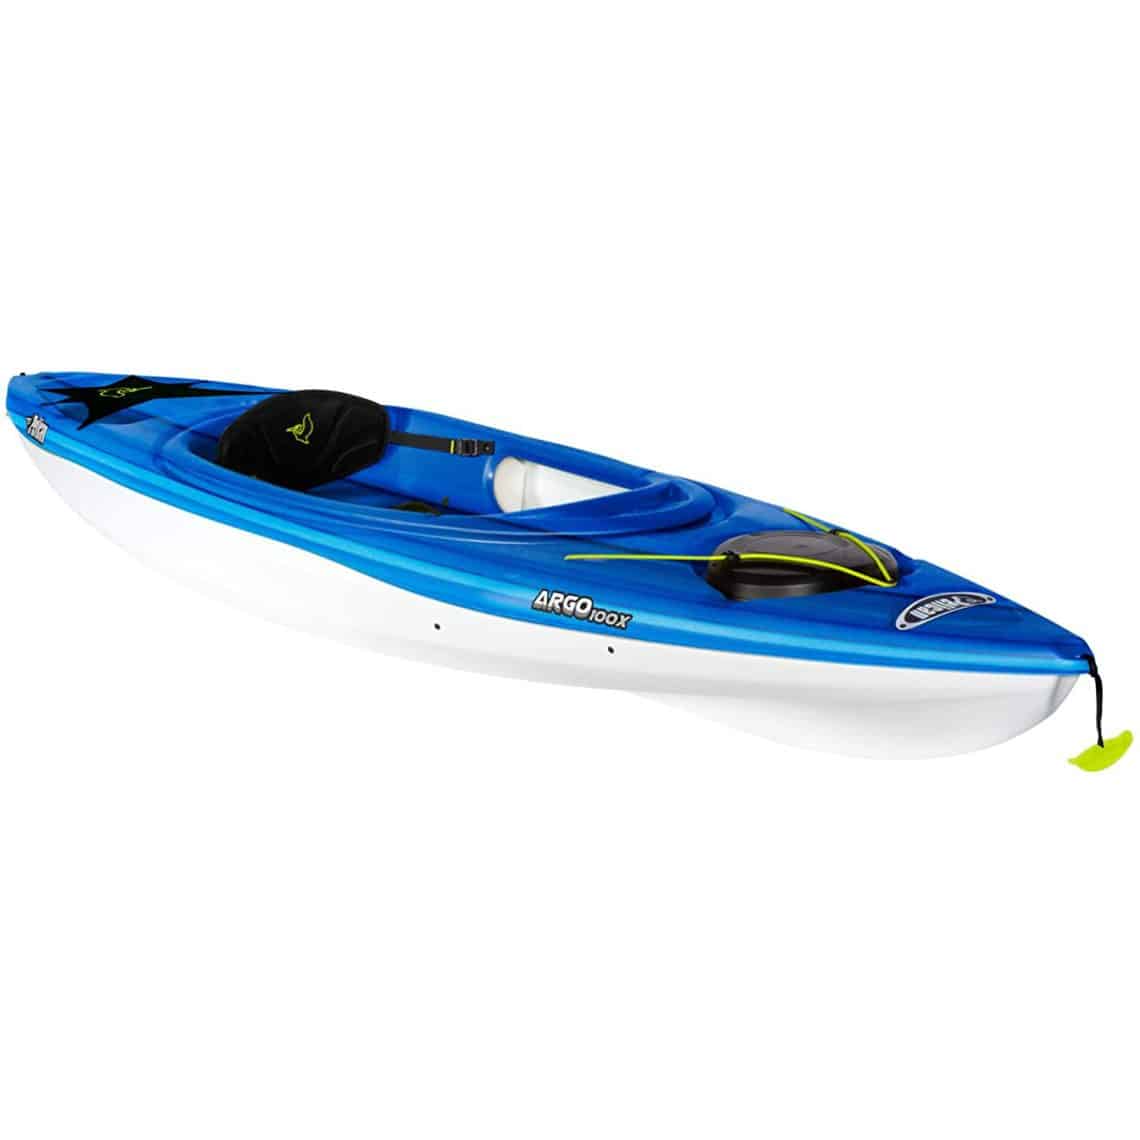 PELICAN ARGO 100X SIT IN KAYAK - FADE DEEP BLUE/WHITE - Northwoods  Wholesale Outlet